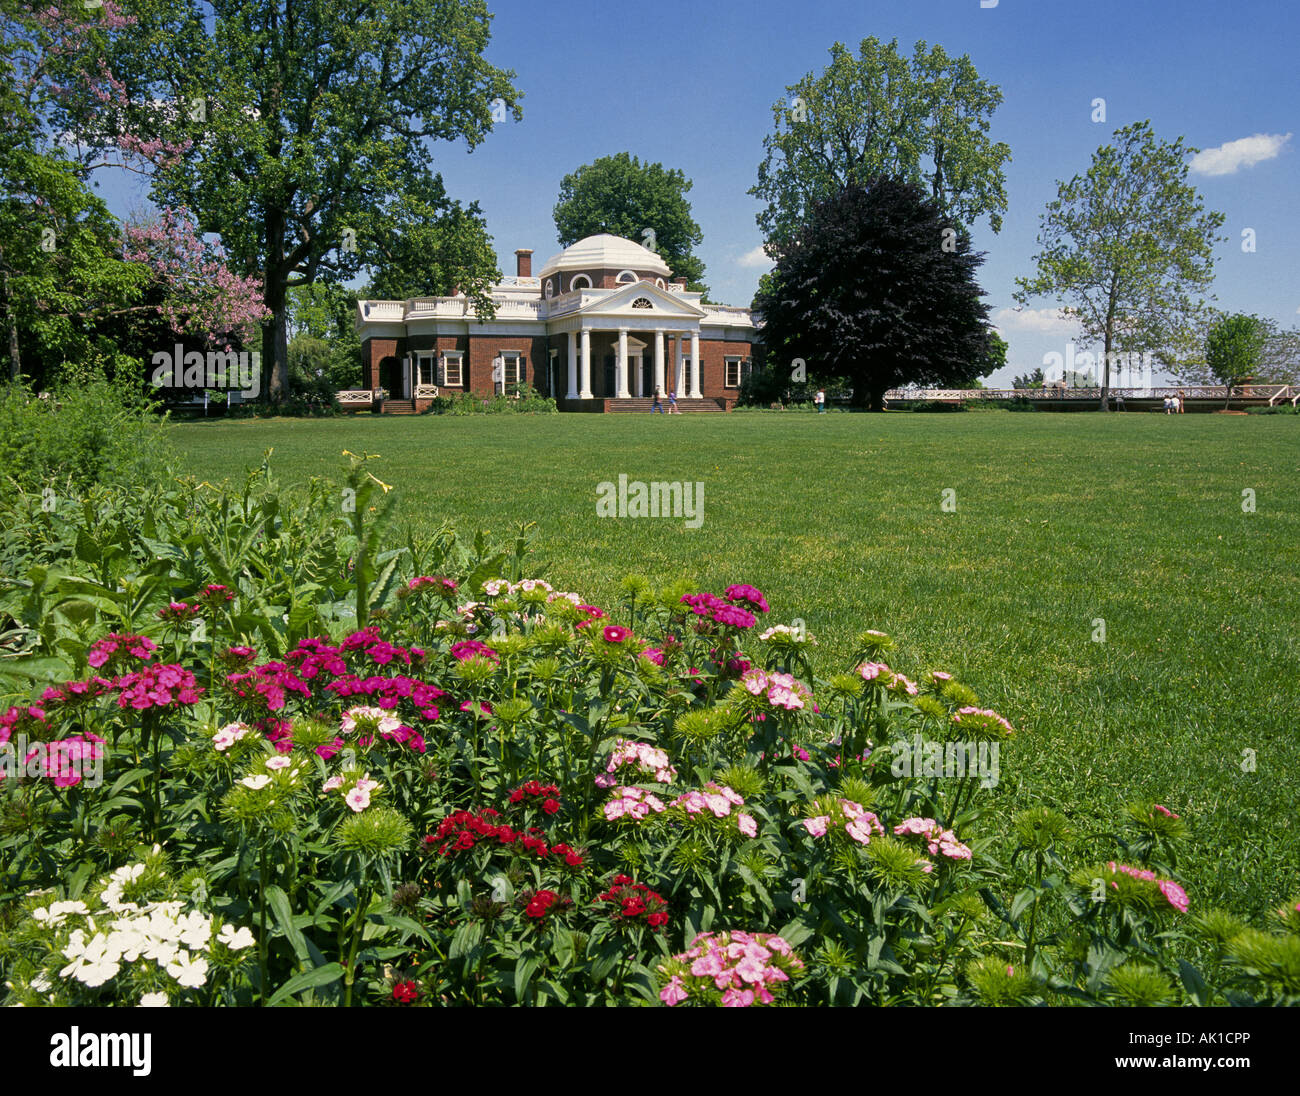 The grounds and gardens at Monticello home of Thomas Jefferson third president of the United States Stock Photo